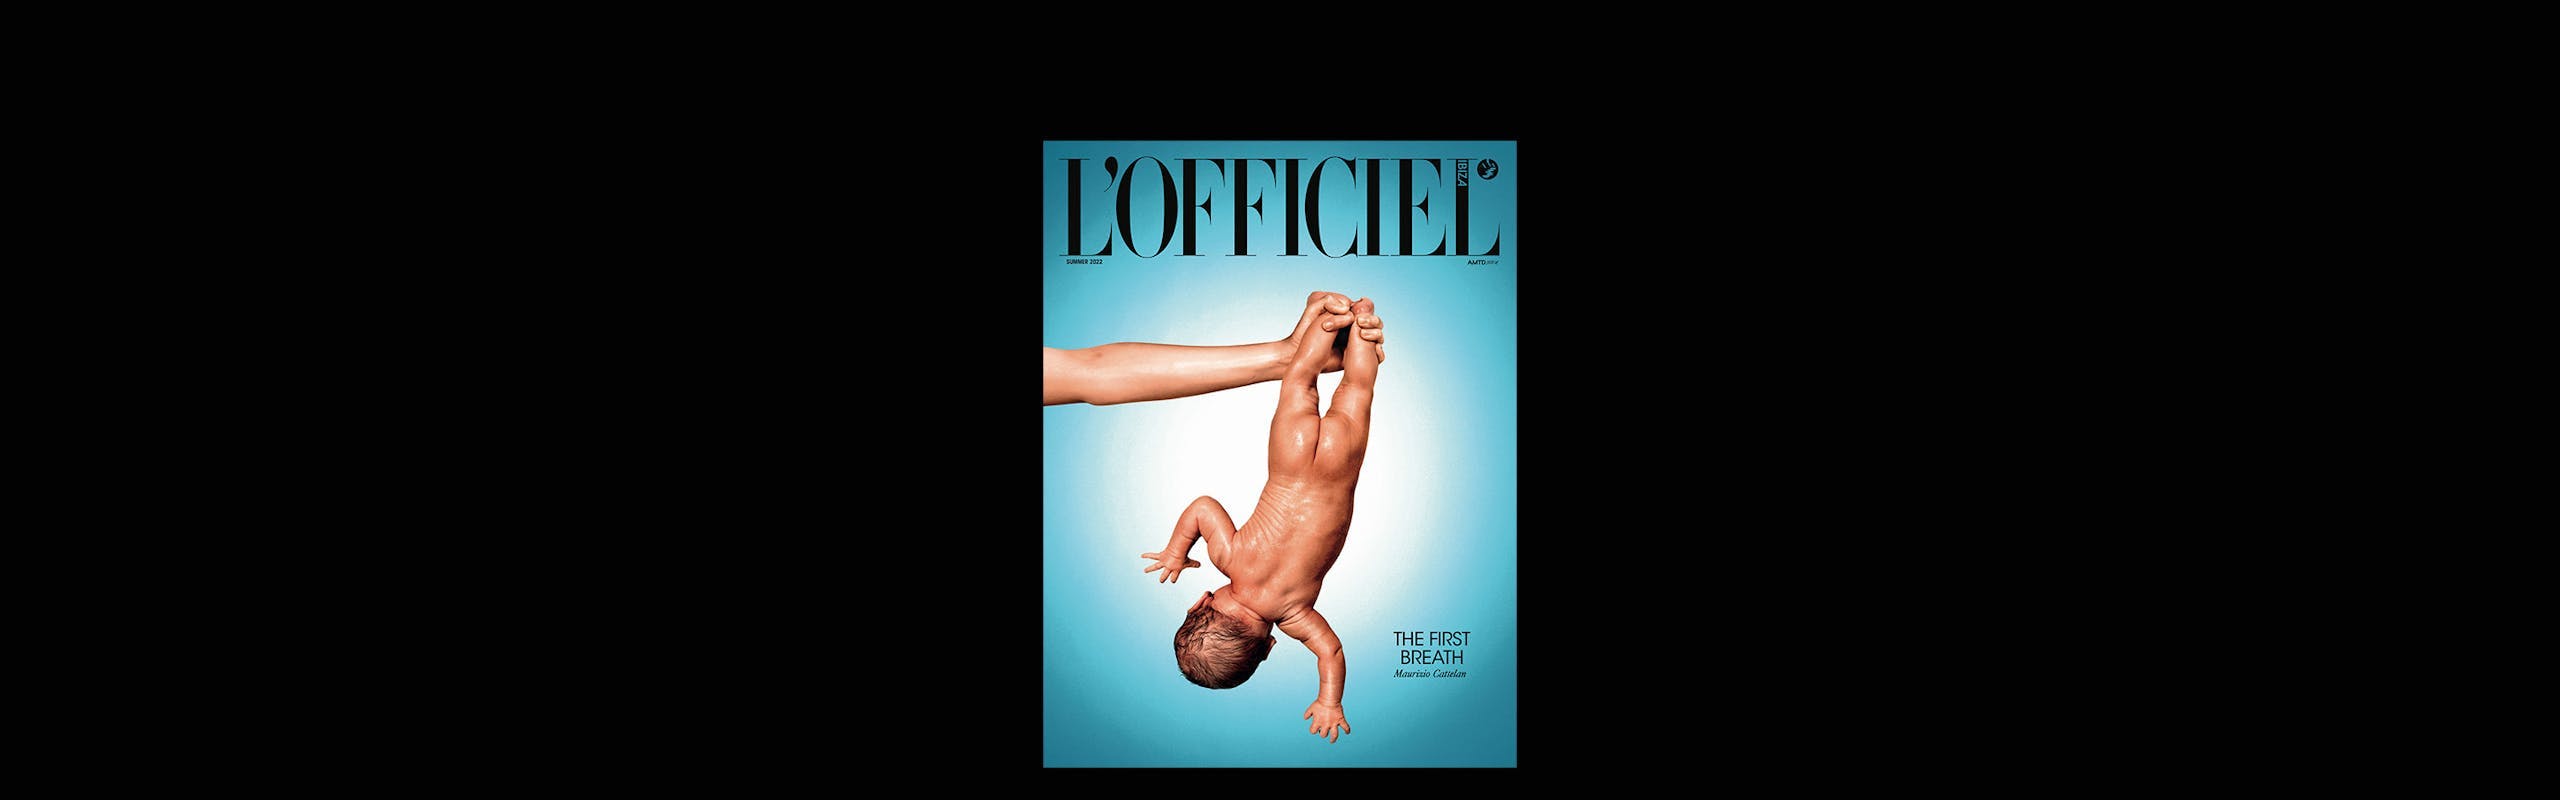 L'Officiel Ibiza - The First Breath by Maurizio Cattelan 